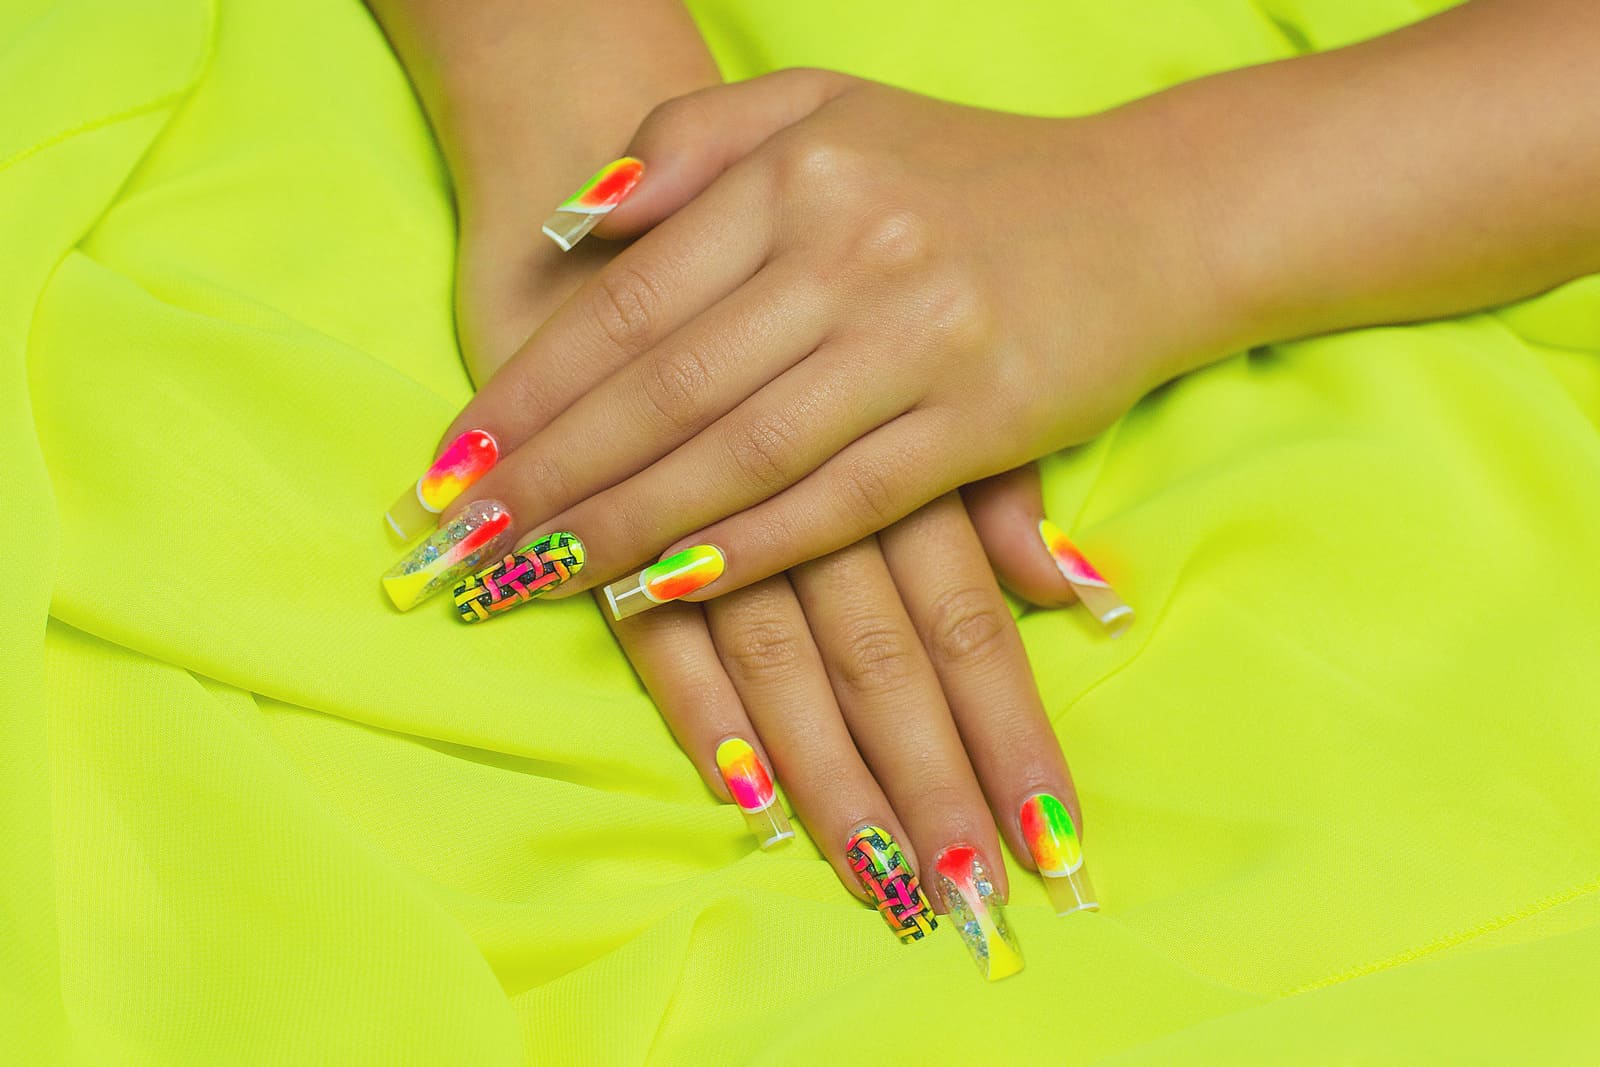 2. Simple Summer Nail Designs to Try at Home - wide 3